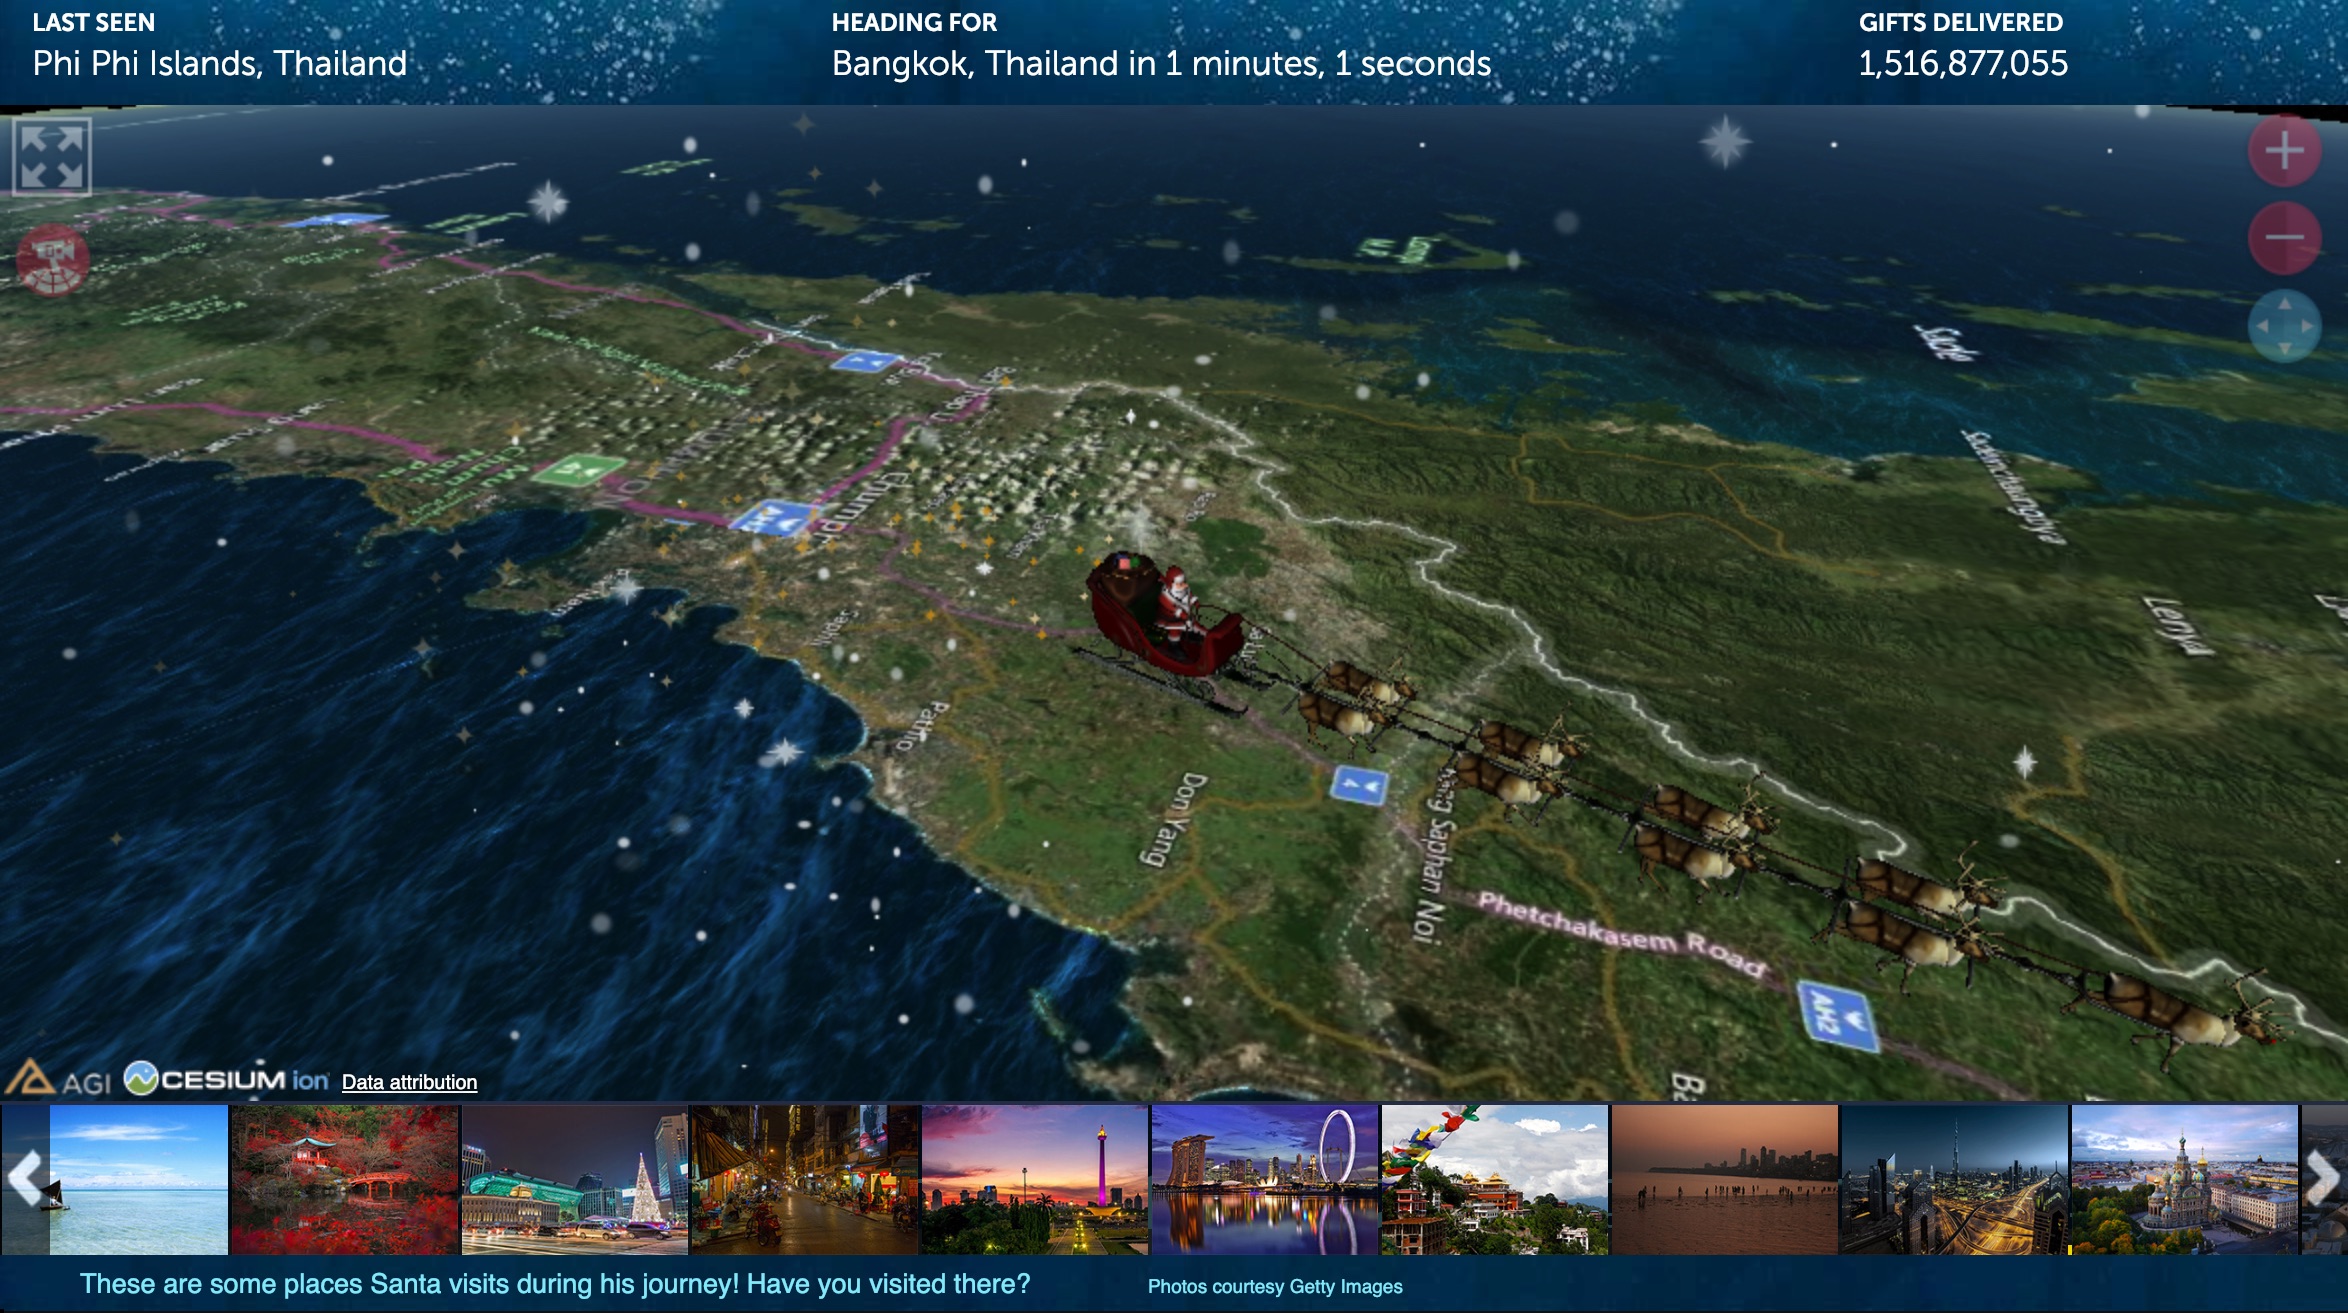 It’s Christmas Eve 2018 and NORAD Will Once Again Track Santa’s Journey